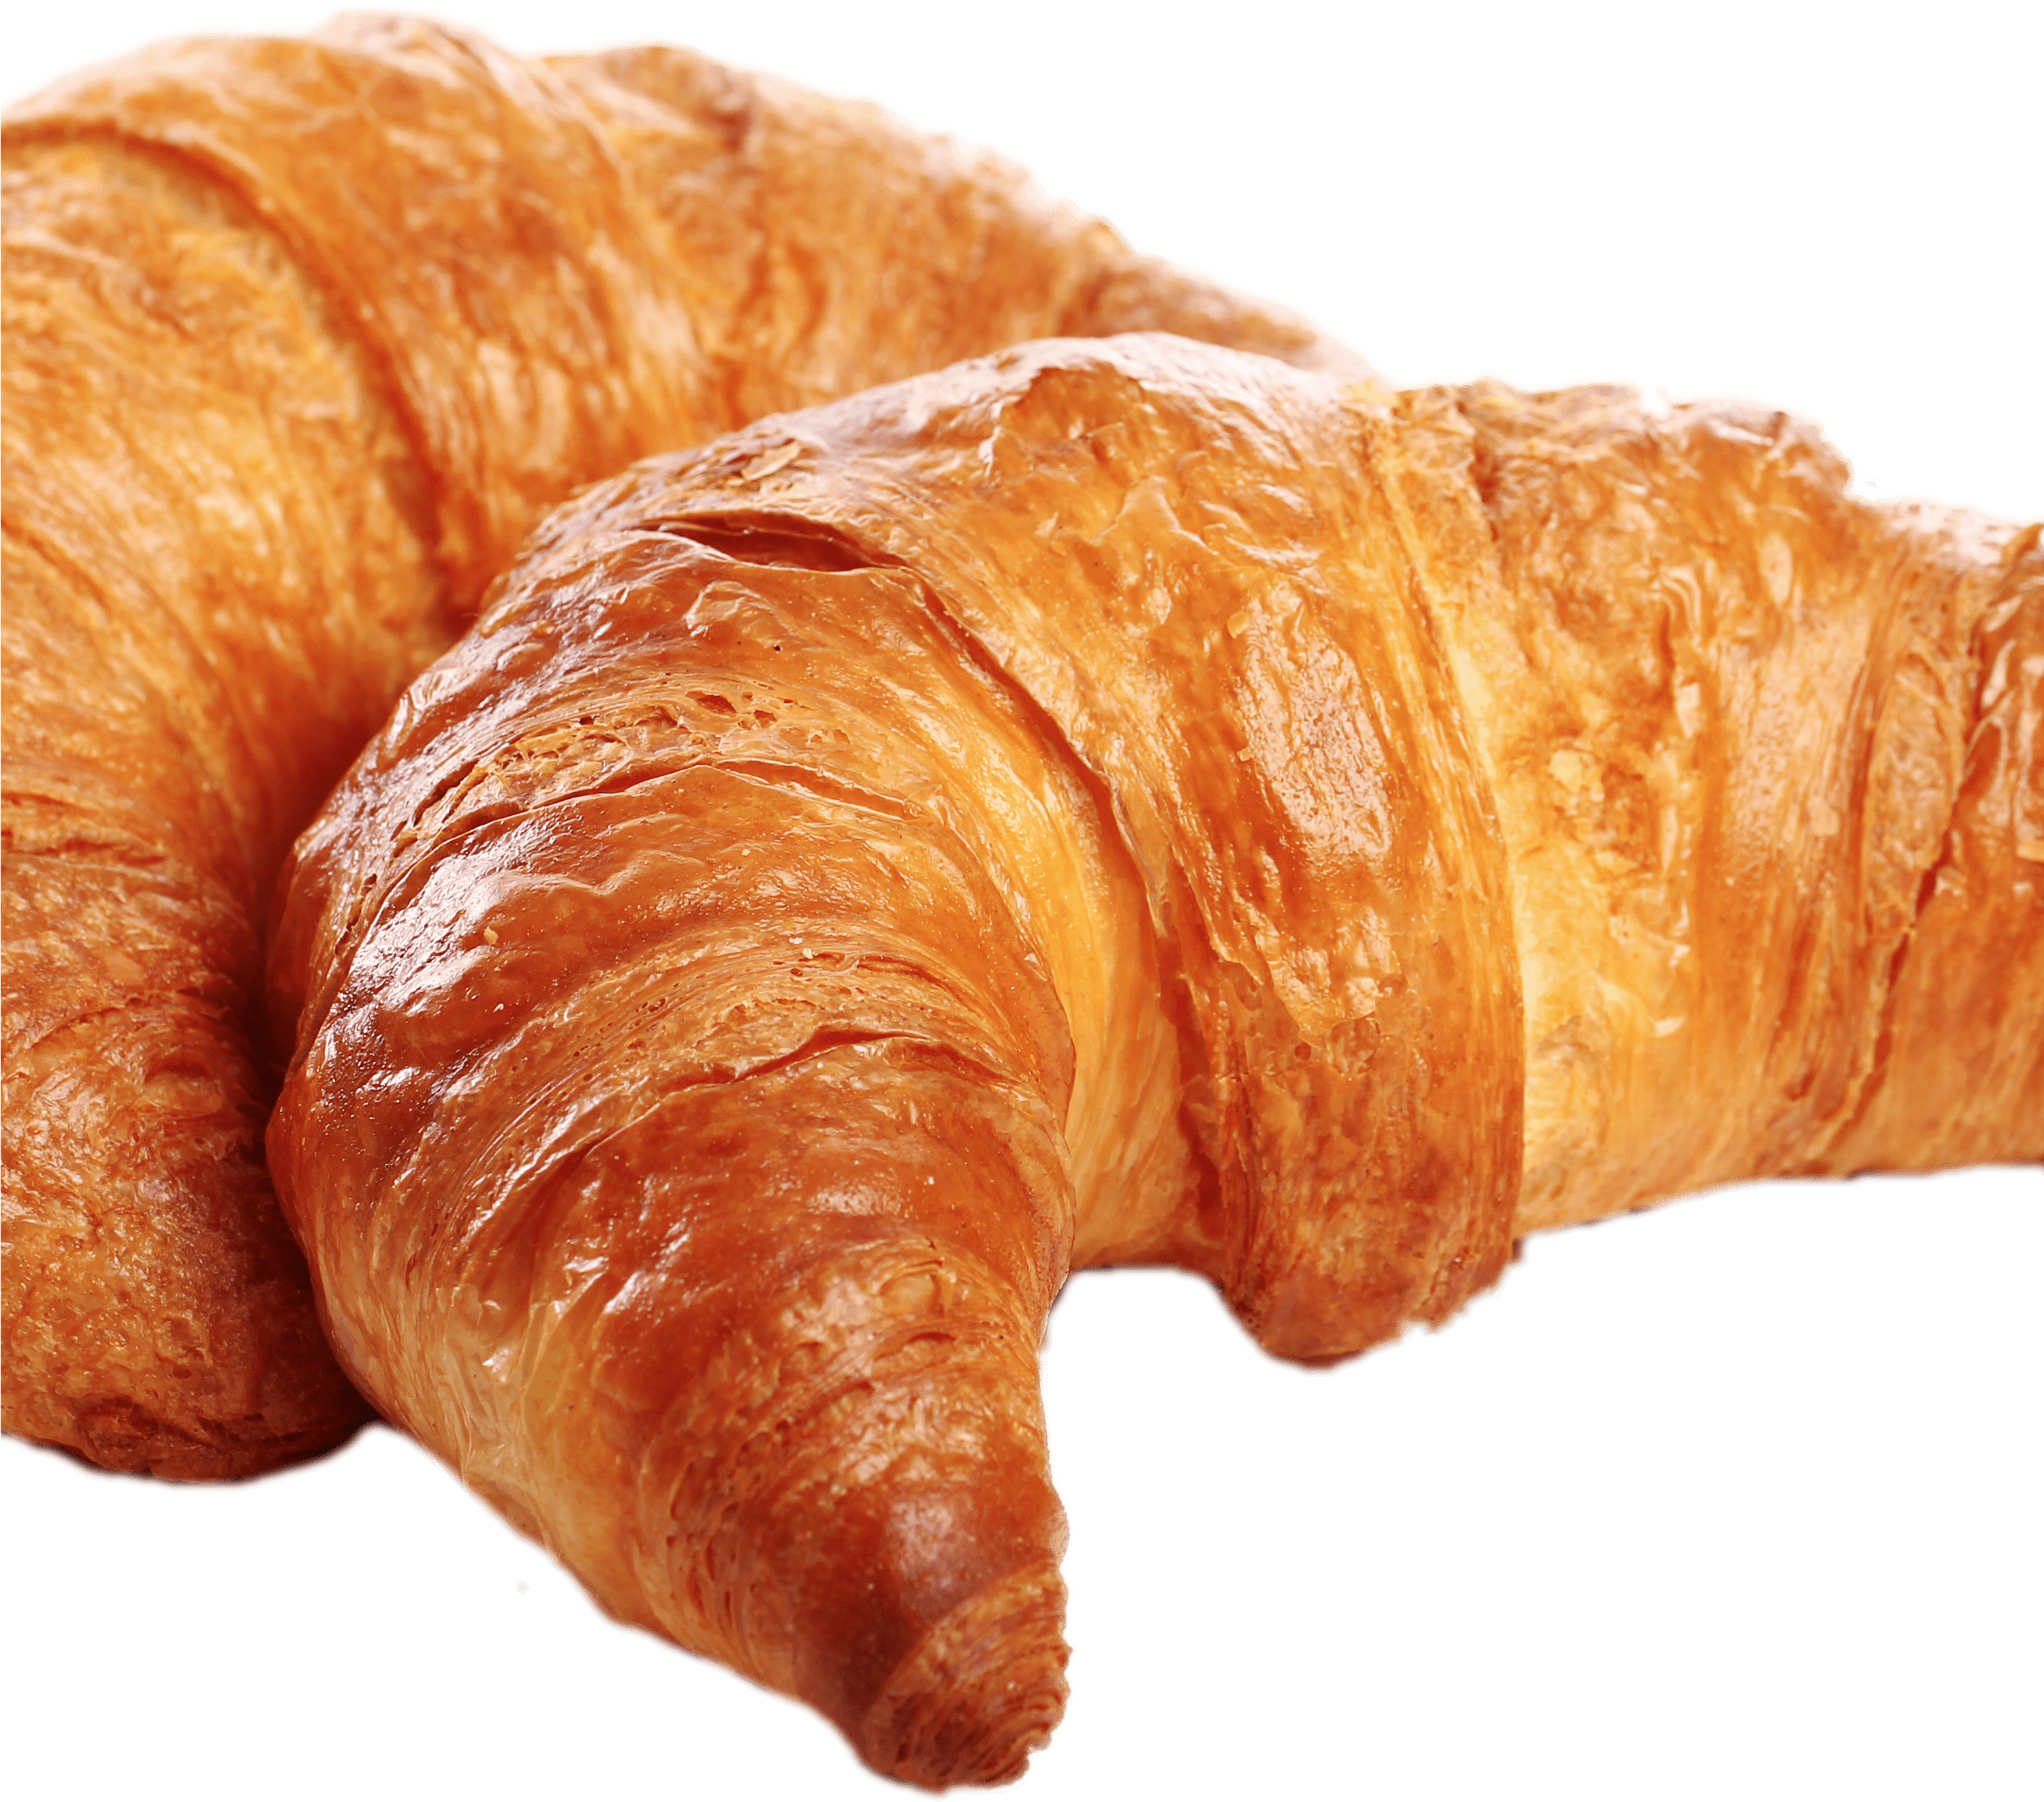 Croissants french food.